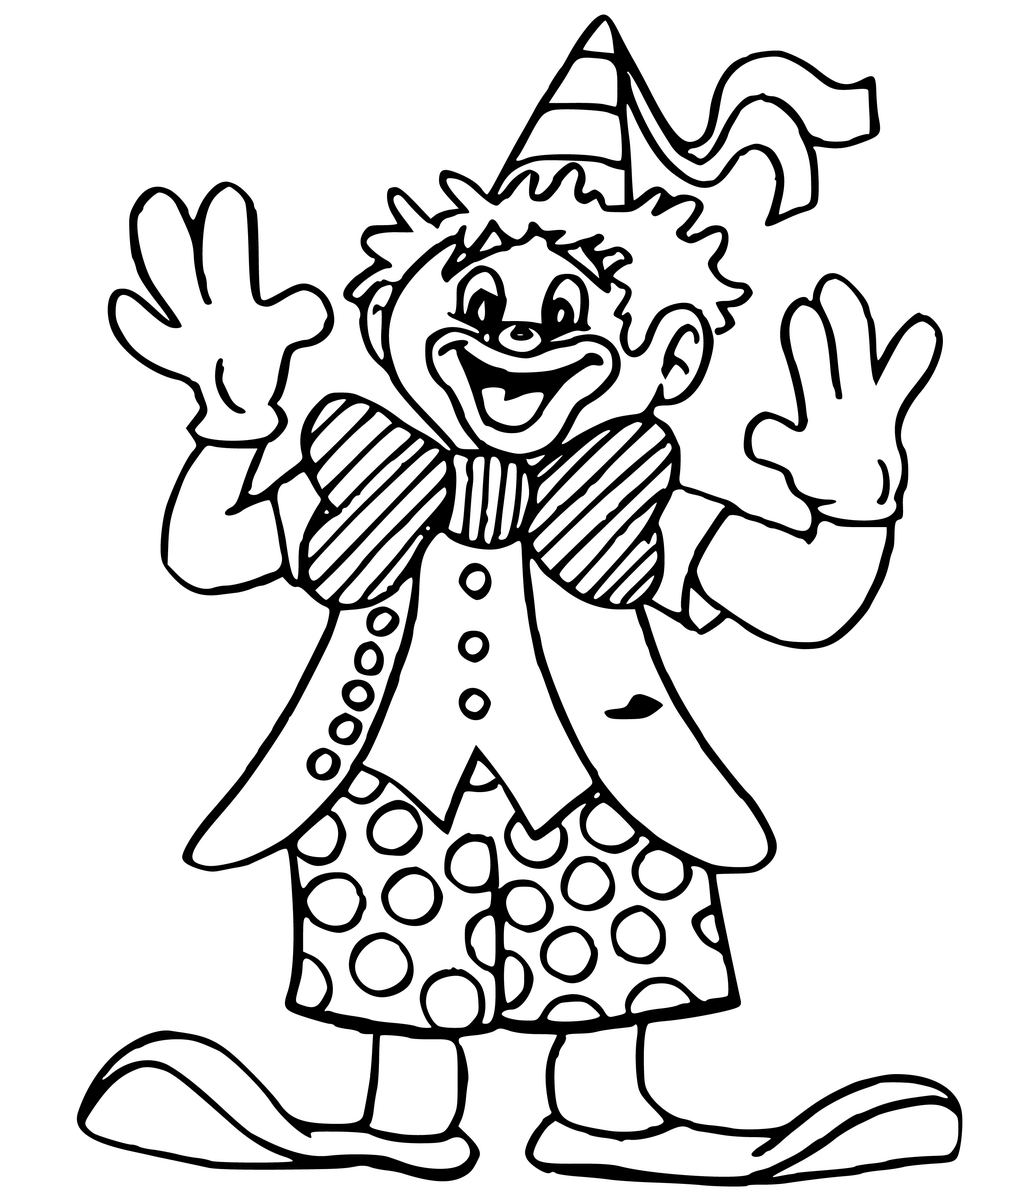 Cute Clown Coloring Pages at Free printable